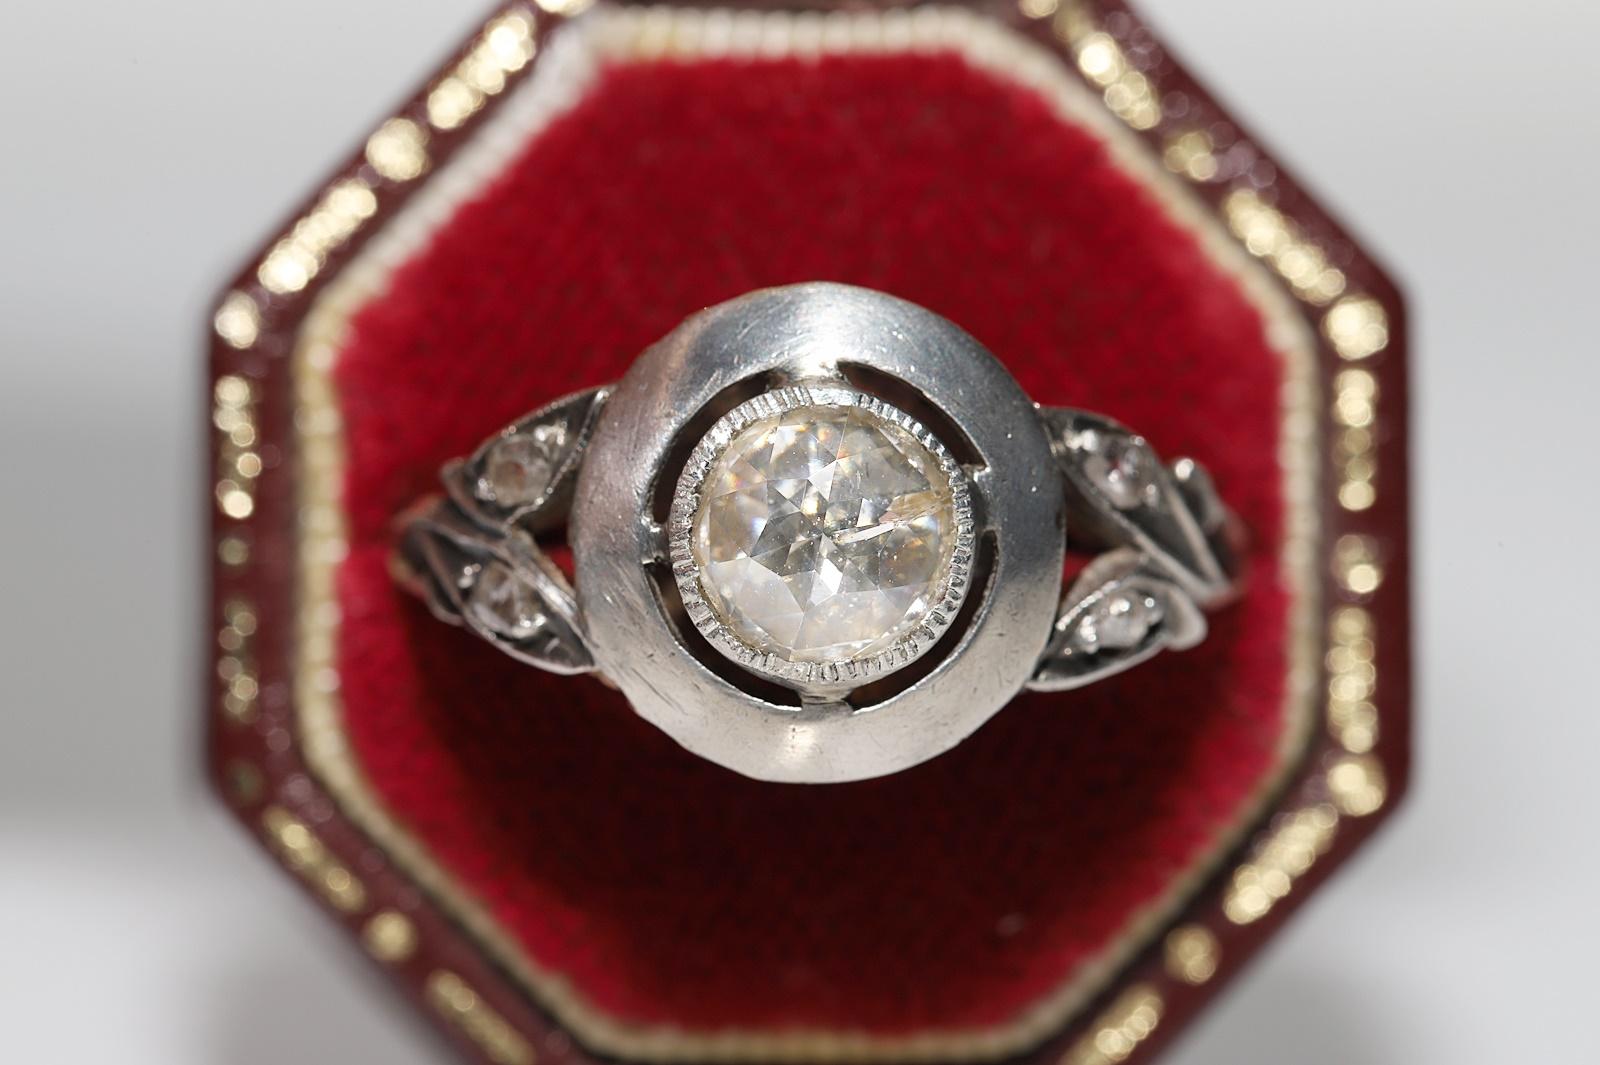 In very good condition.
Total weight is 3.5 grams.
Totally is diamond 0.75 ct.
The diamond is has S3 clarity and Light brown color.
Ring size is US 6 (We offer free resizing)
We can make any size.
Acid tested to 8k real gold.
Box is not